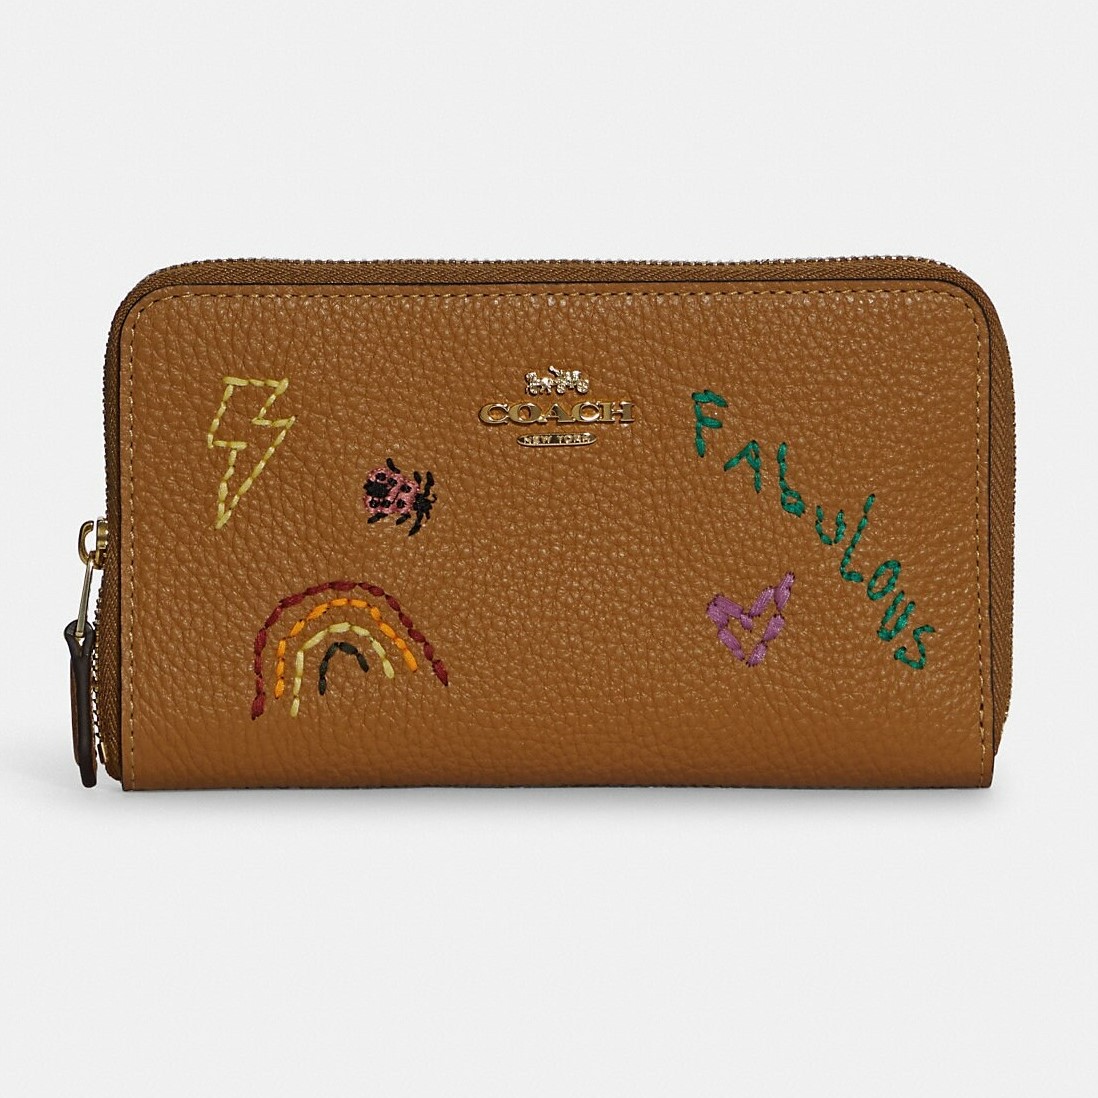 VÍ DÀI BROWN COACH MEDIUM ID ZIP WALLET WITH DIARY EMBROIDERY 2